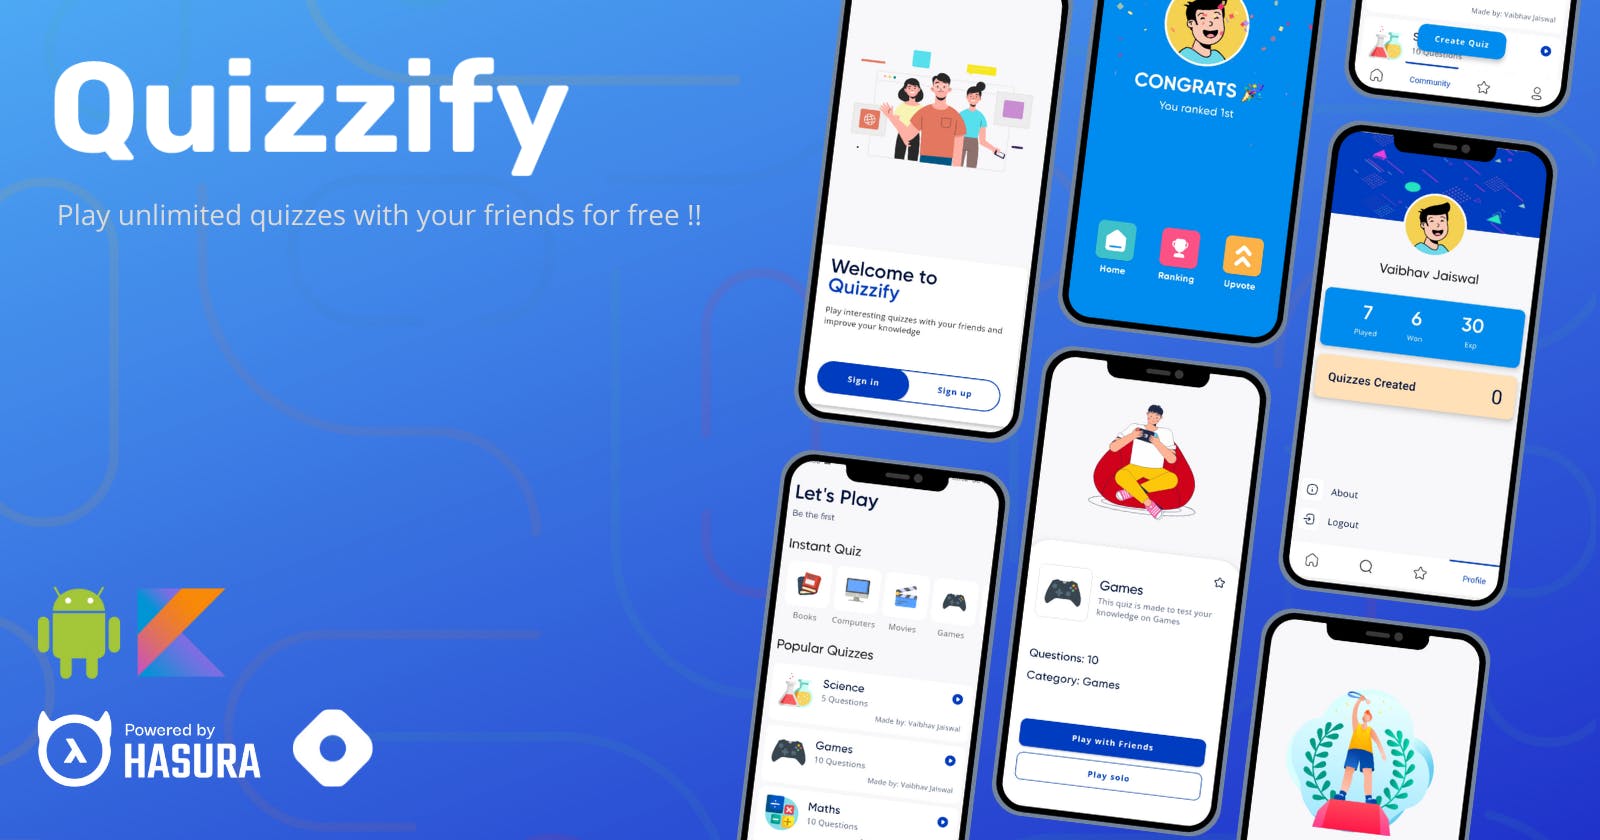 Quizzify - Play unlimited quizzes with your friends for free!! 🔥